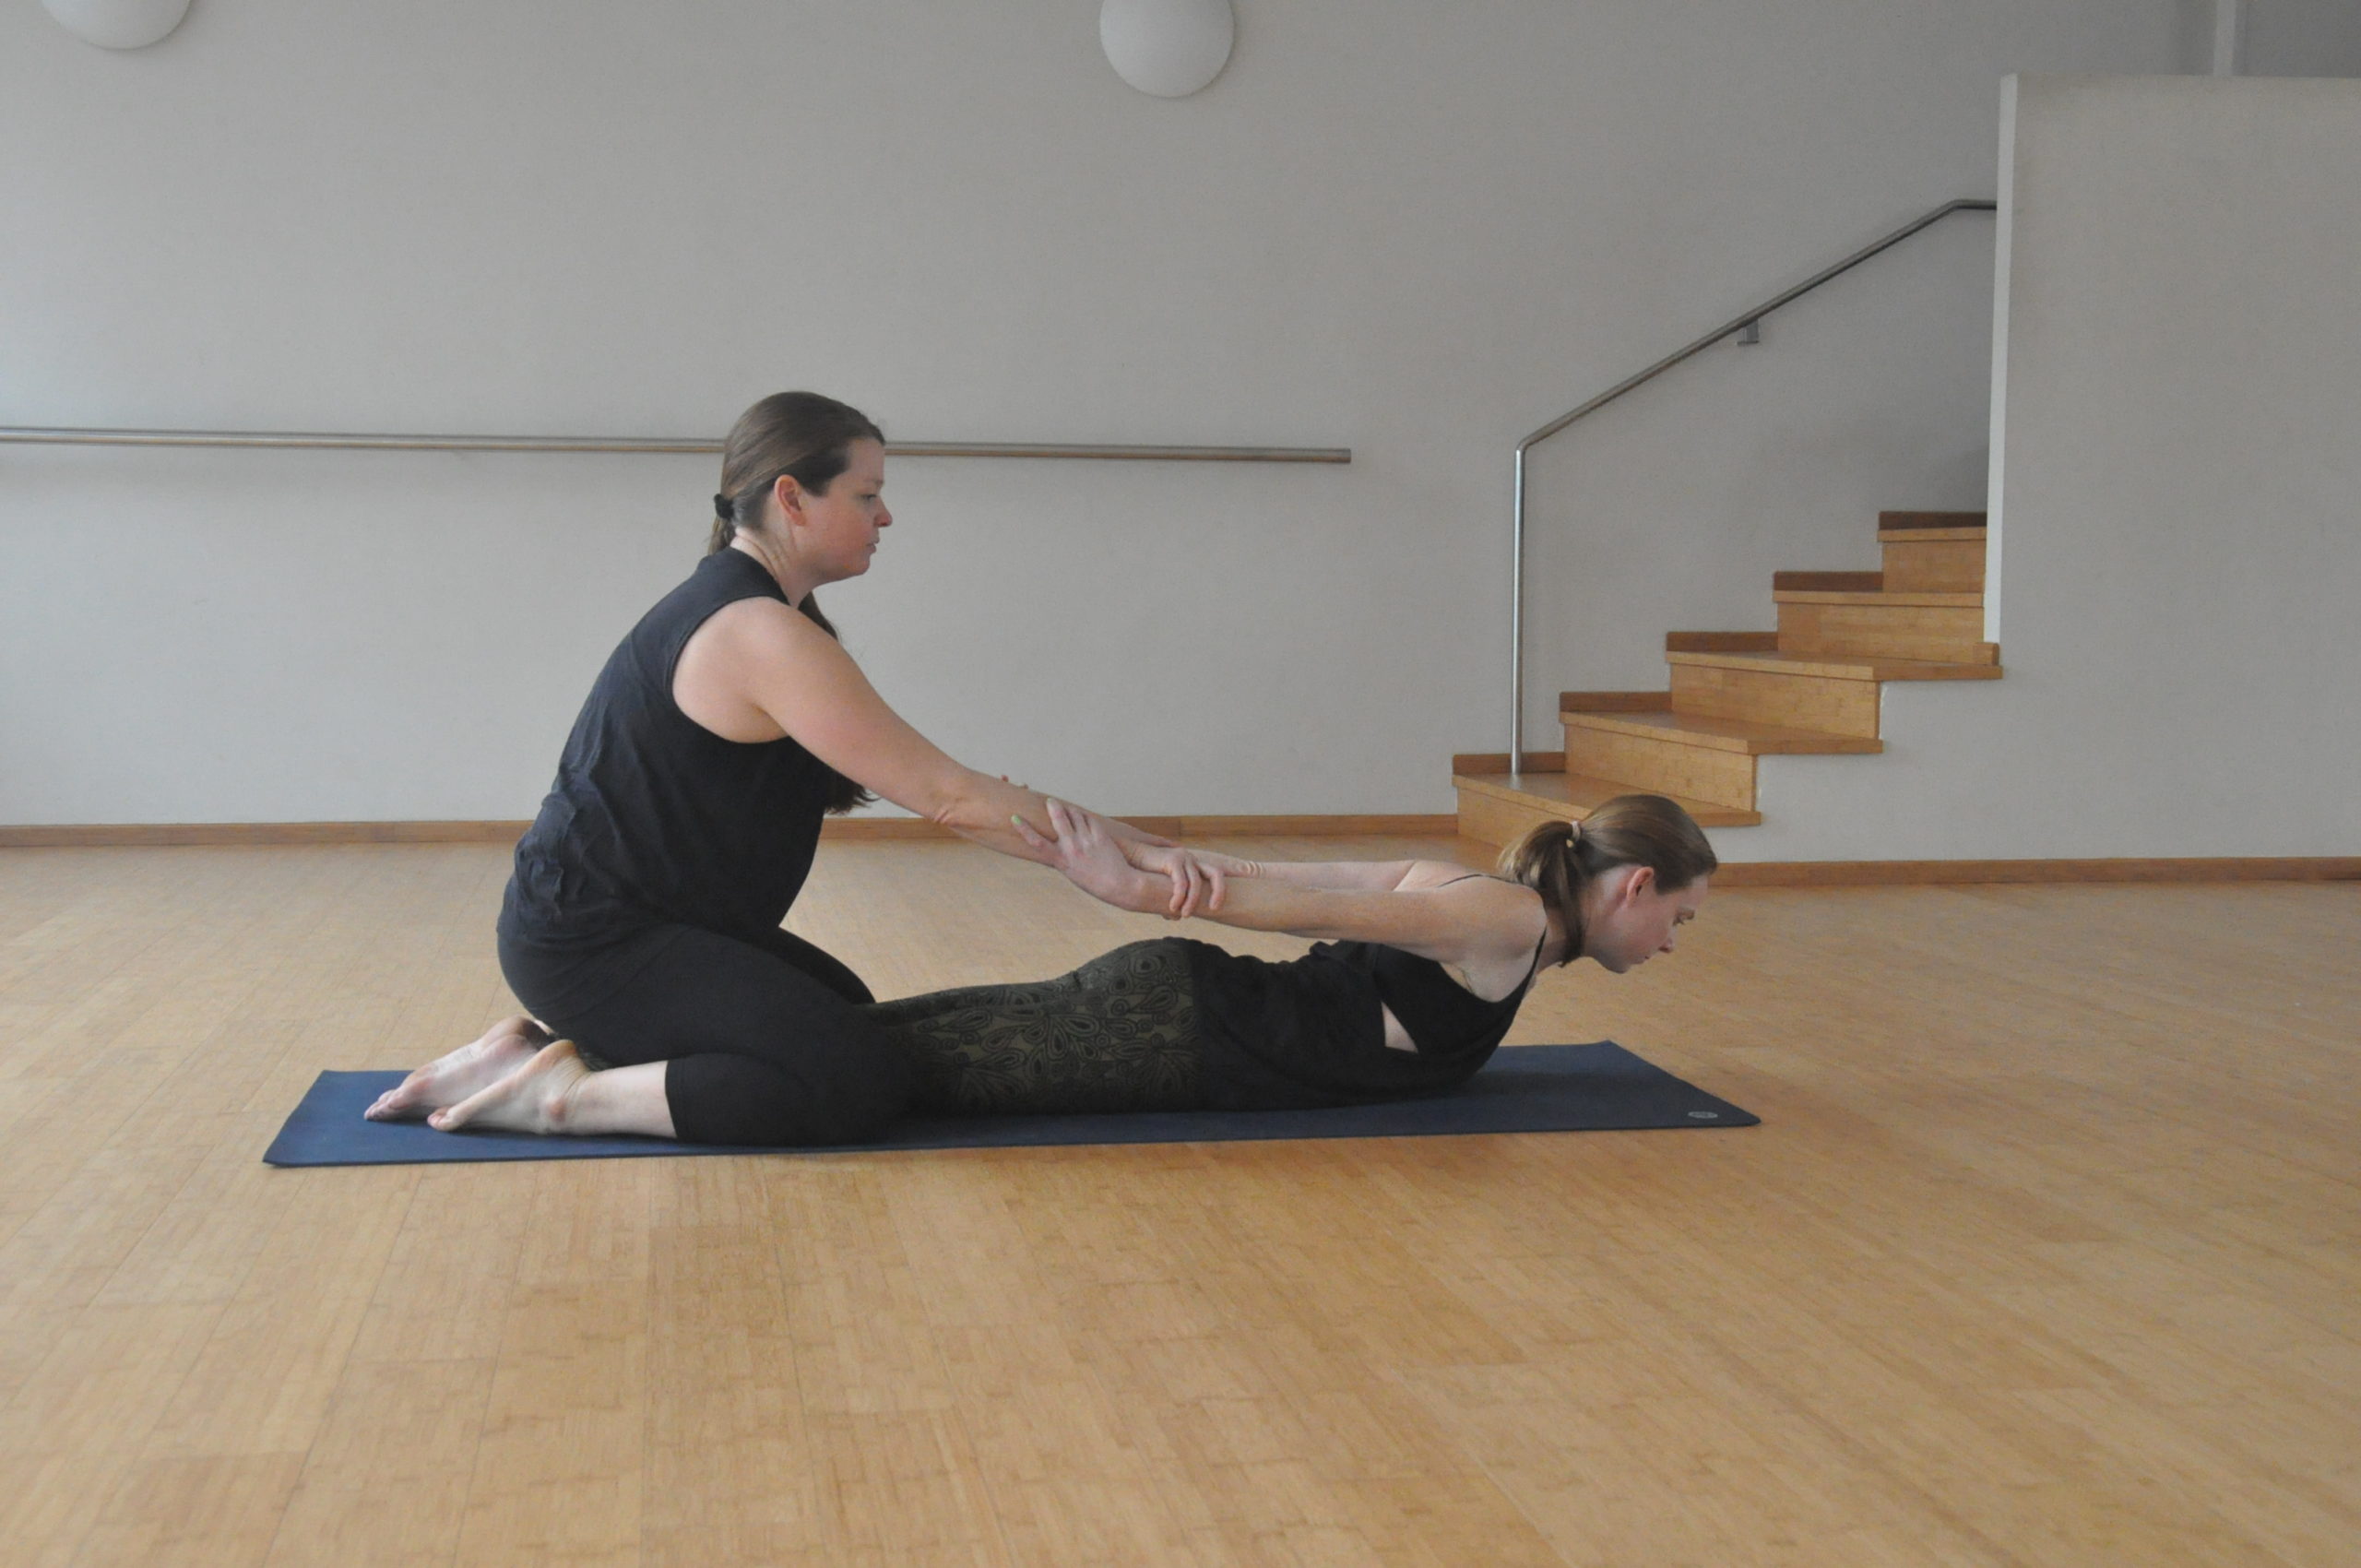 Physical Adjusting in Yoga Practice